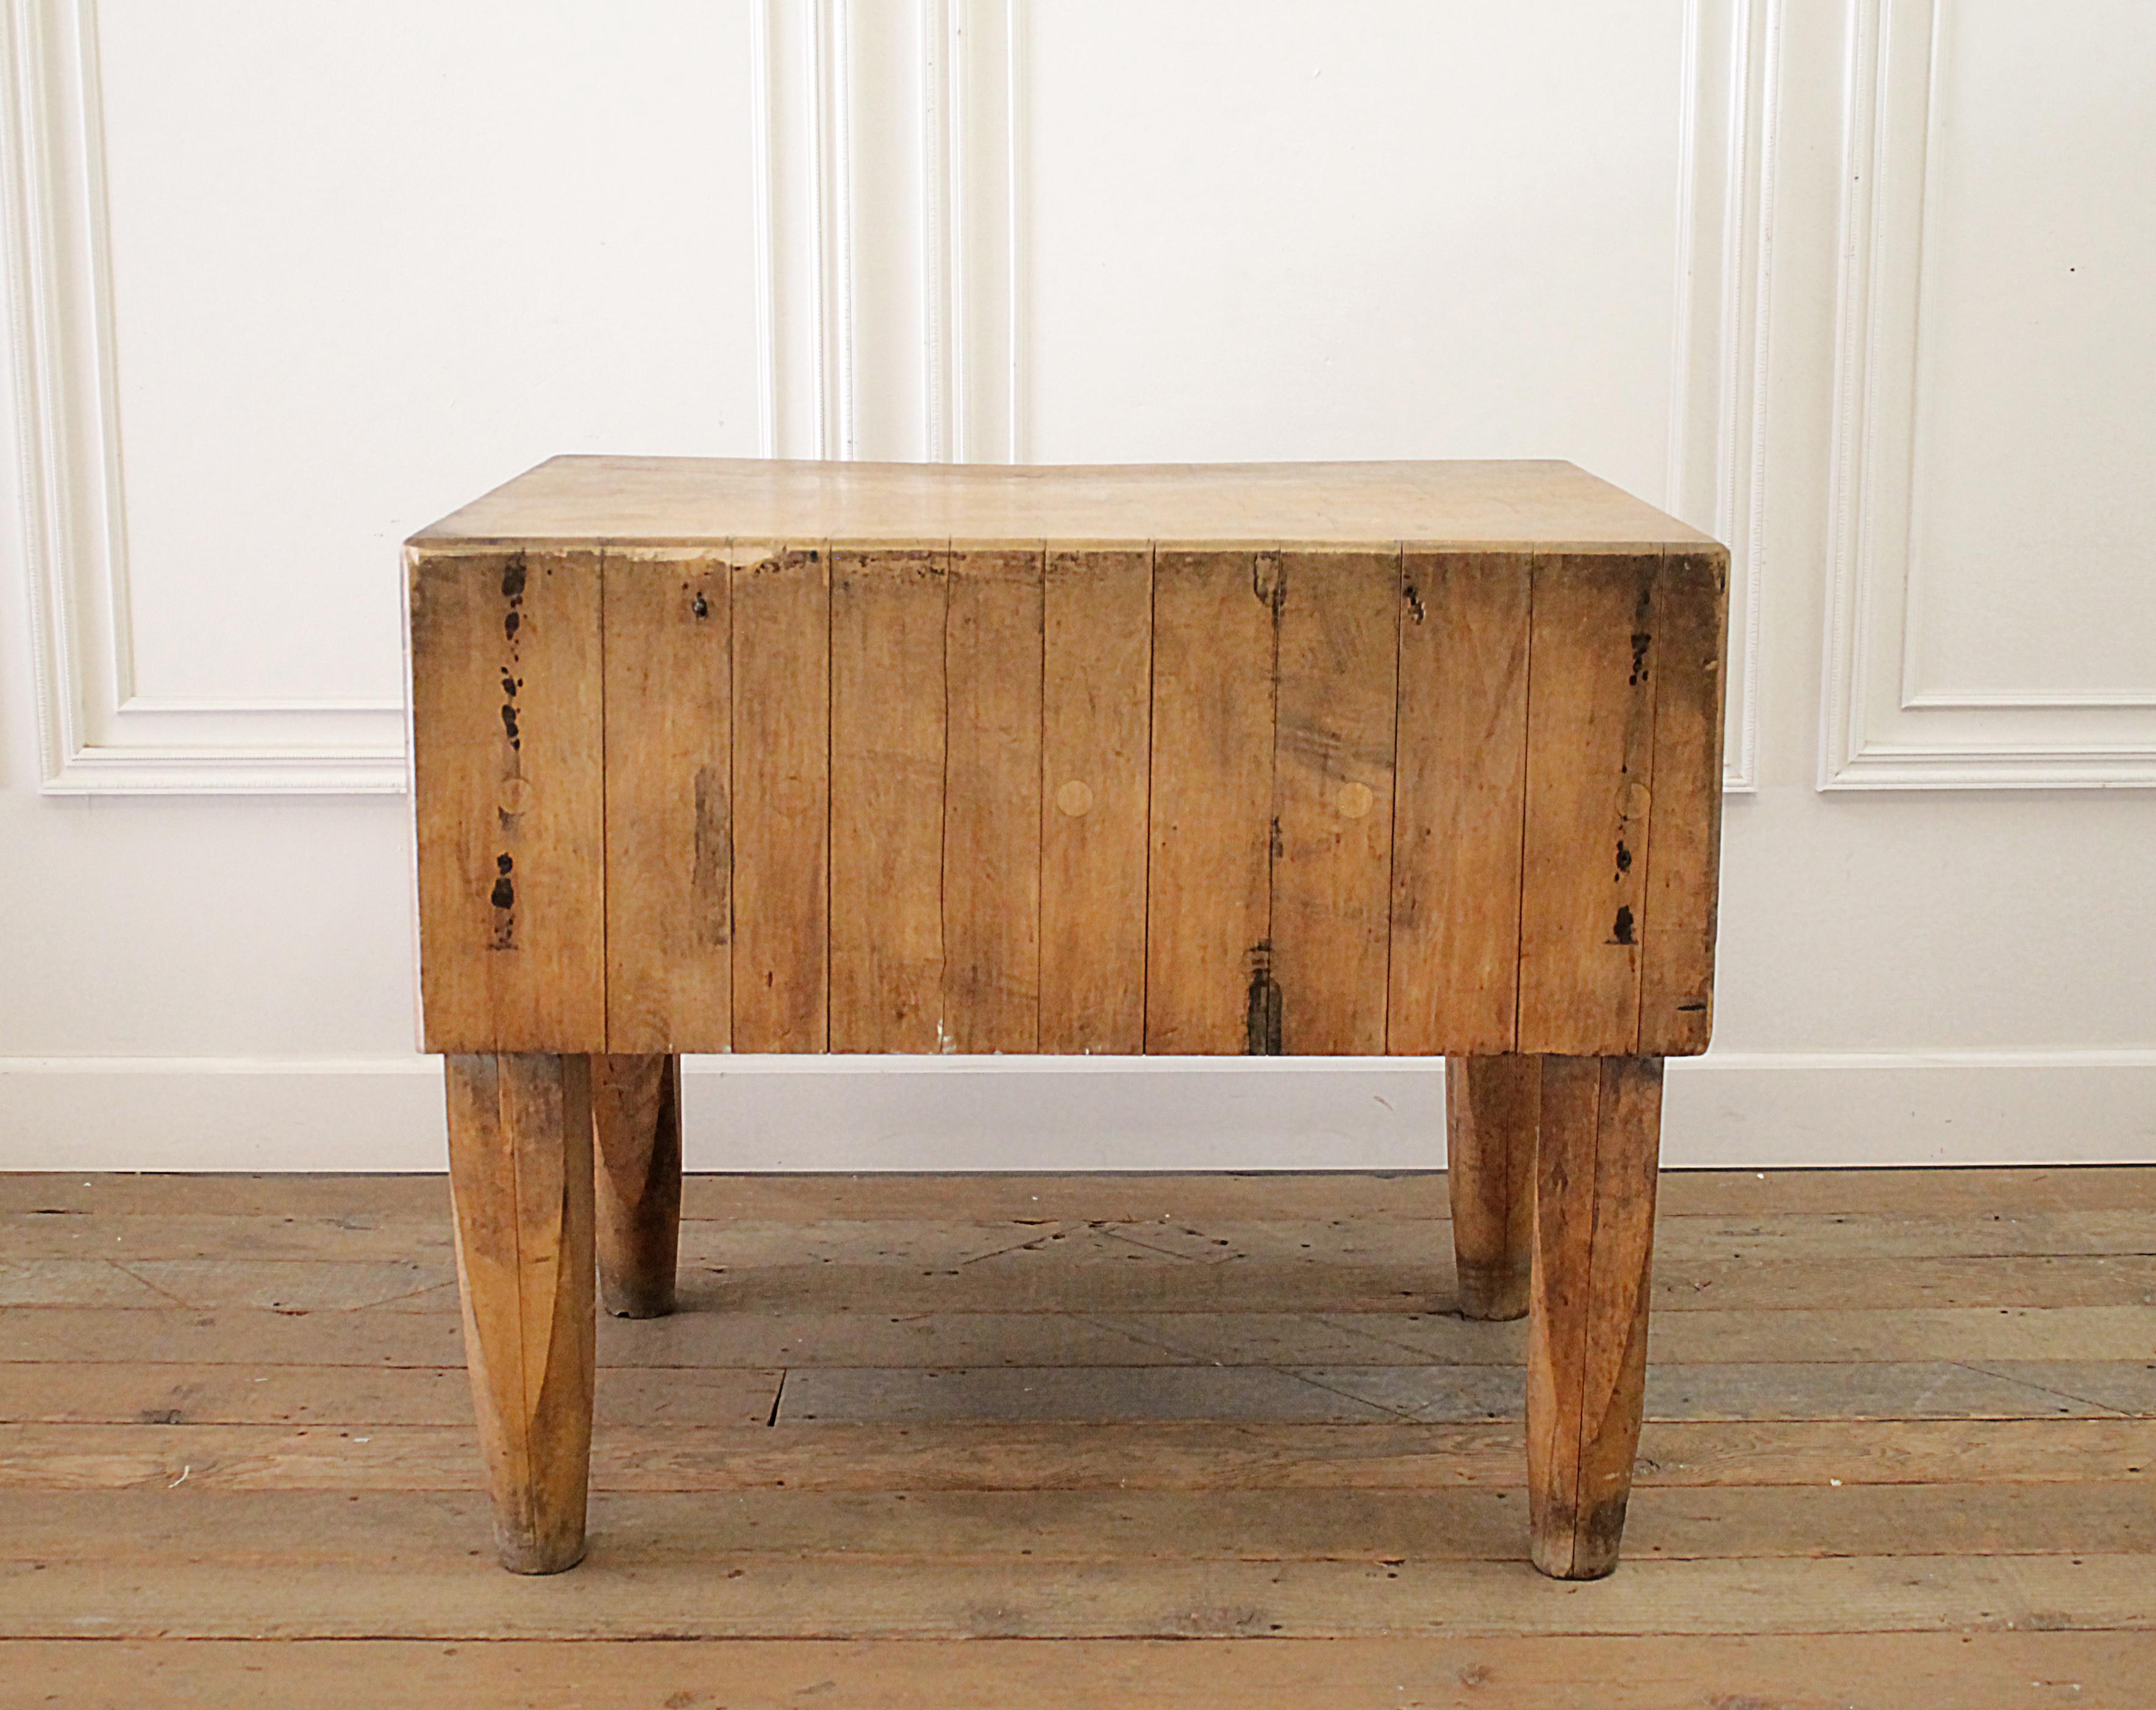 A beautiful antique maple French butcher block table with aged and wonderful patina. A 16